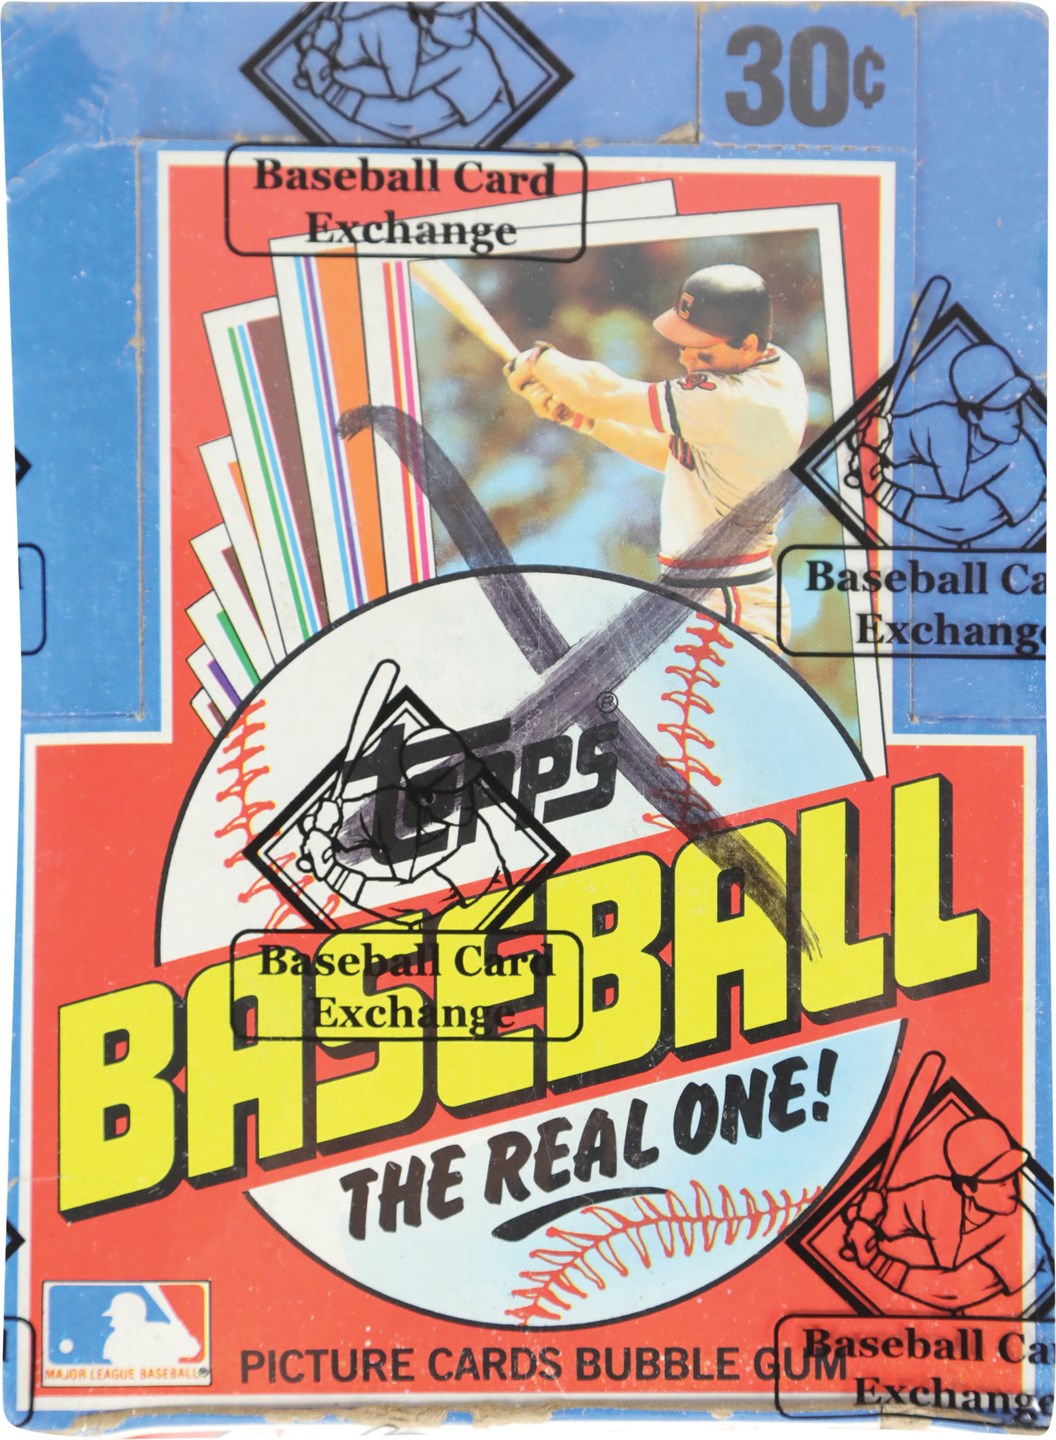 Unopened Boxes, Packs And Cases - 1982 Topps Baseball Unopened Wax Box (BBCE)